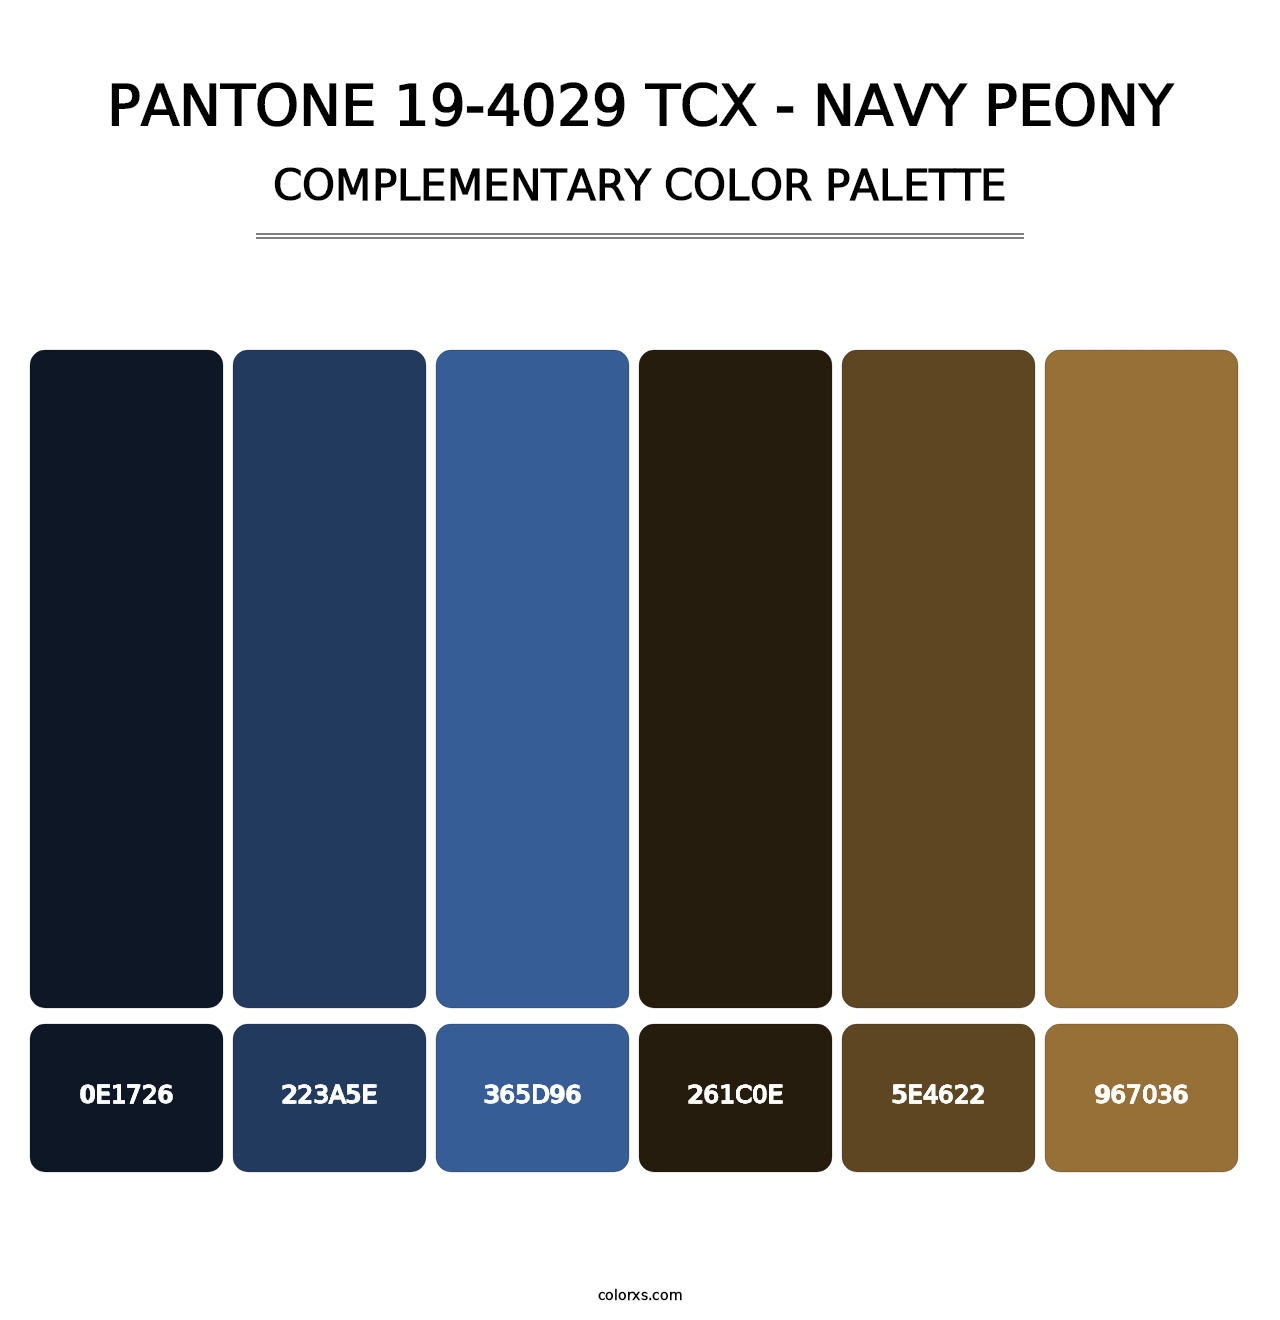 PANTONE 19-4029 TCX - Navy Peony - Complementary Color Palette